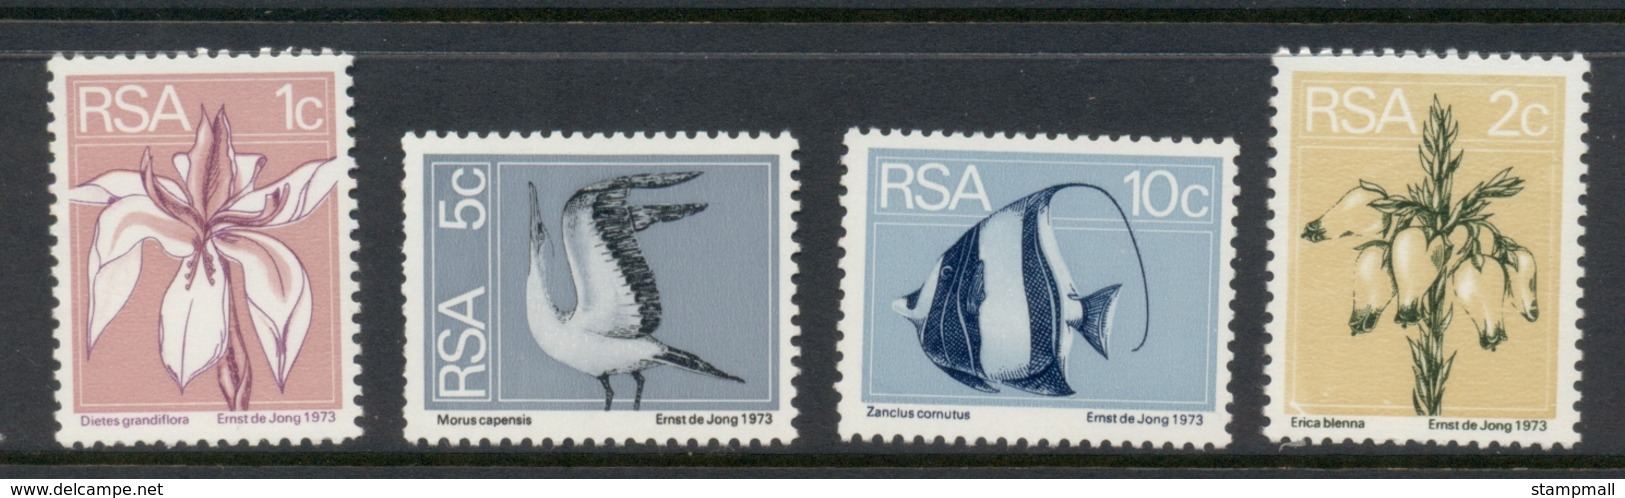 South Africa 1974 Pictorials, Flowers, Fish, Birds  Coils MUH - Unused Stamps